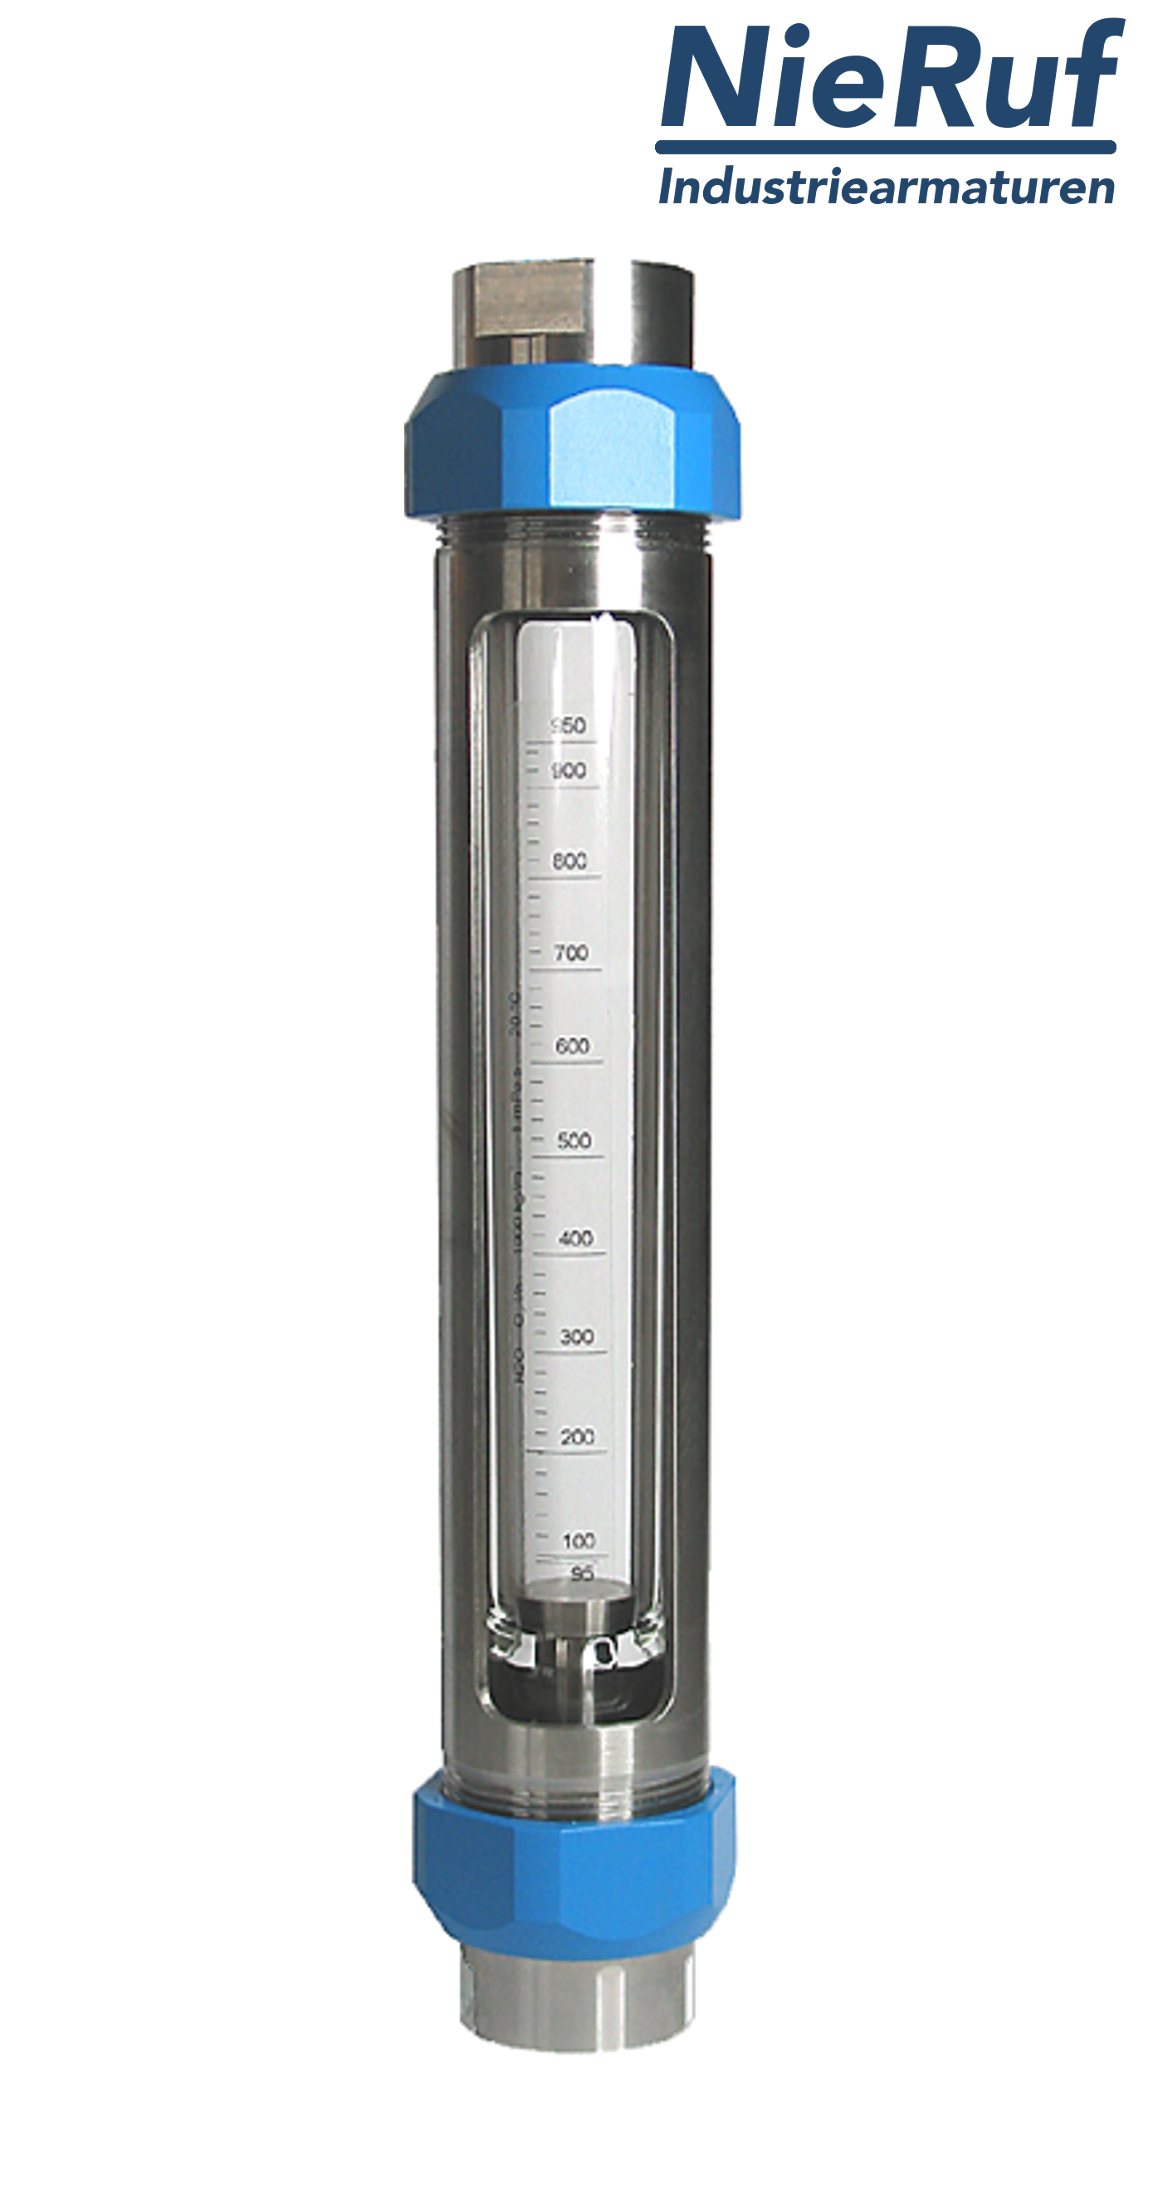 Variable area flowmeter stainless steel + borosilicate 2" inch 6000.0 - 20000 l/h water FKM